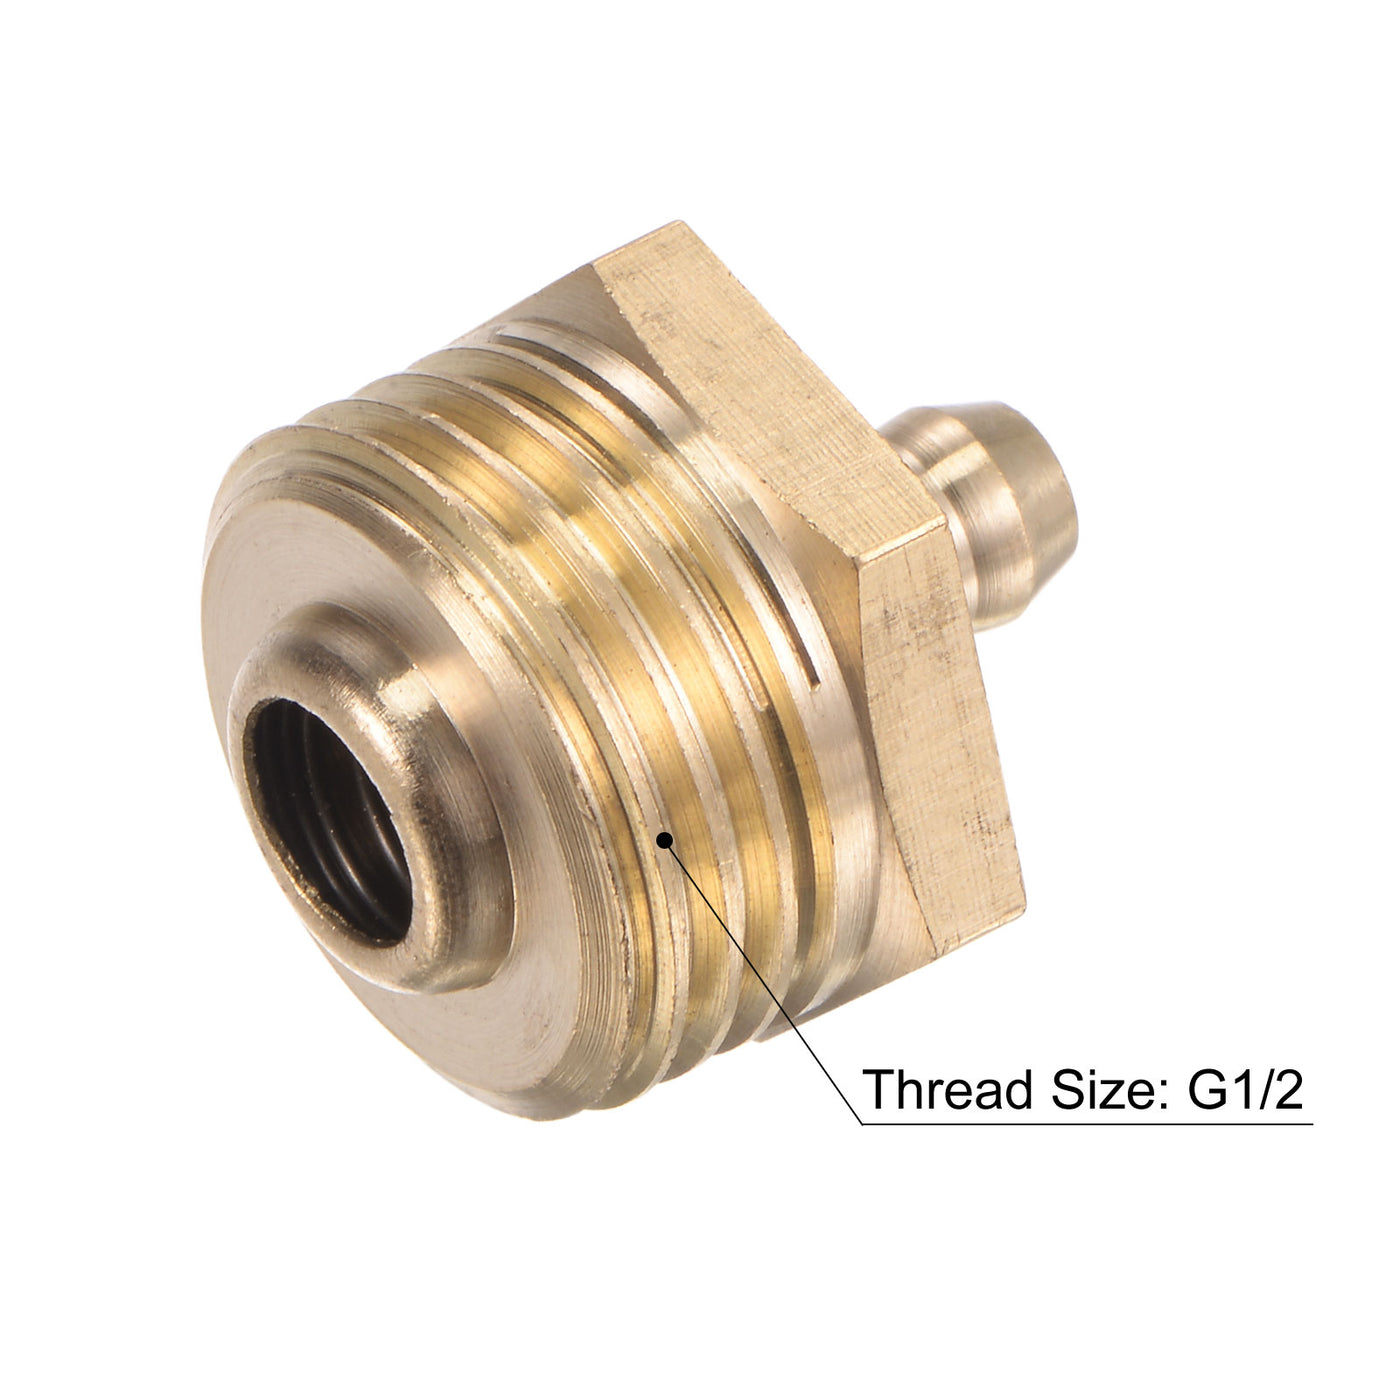 Uxcell Uxcell Brass Straight Hydraulic Grease Fitting G1/2 Thread 21mm Width, 2Pcs